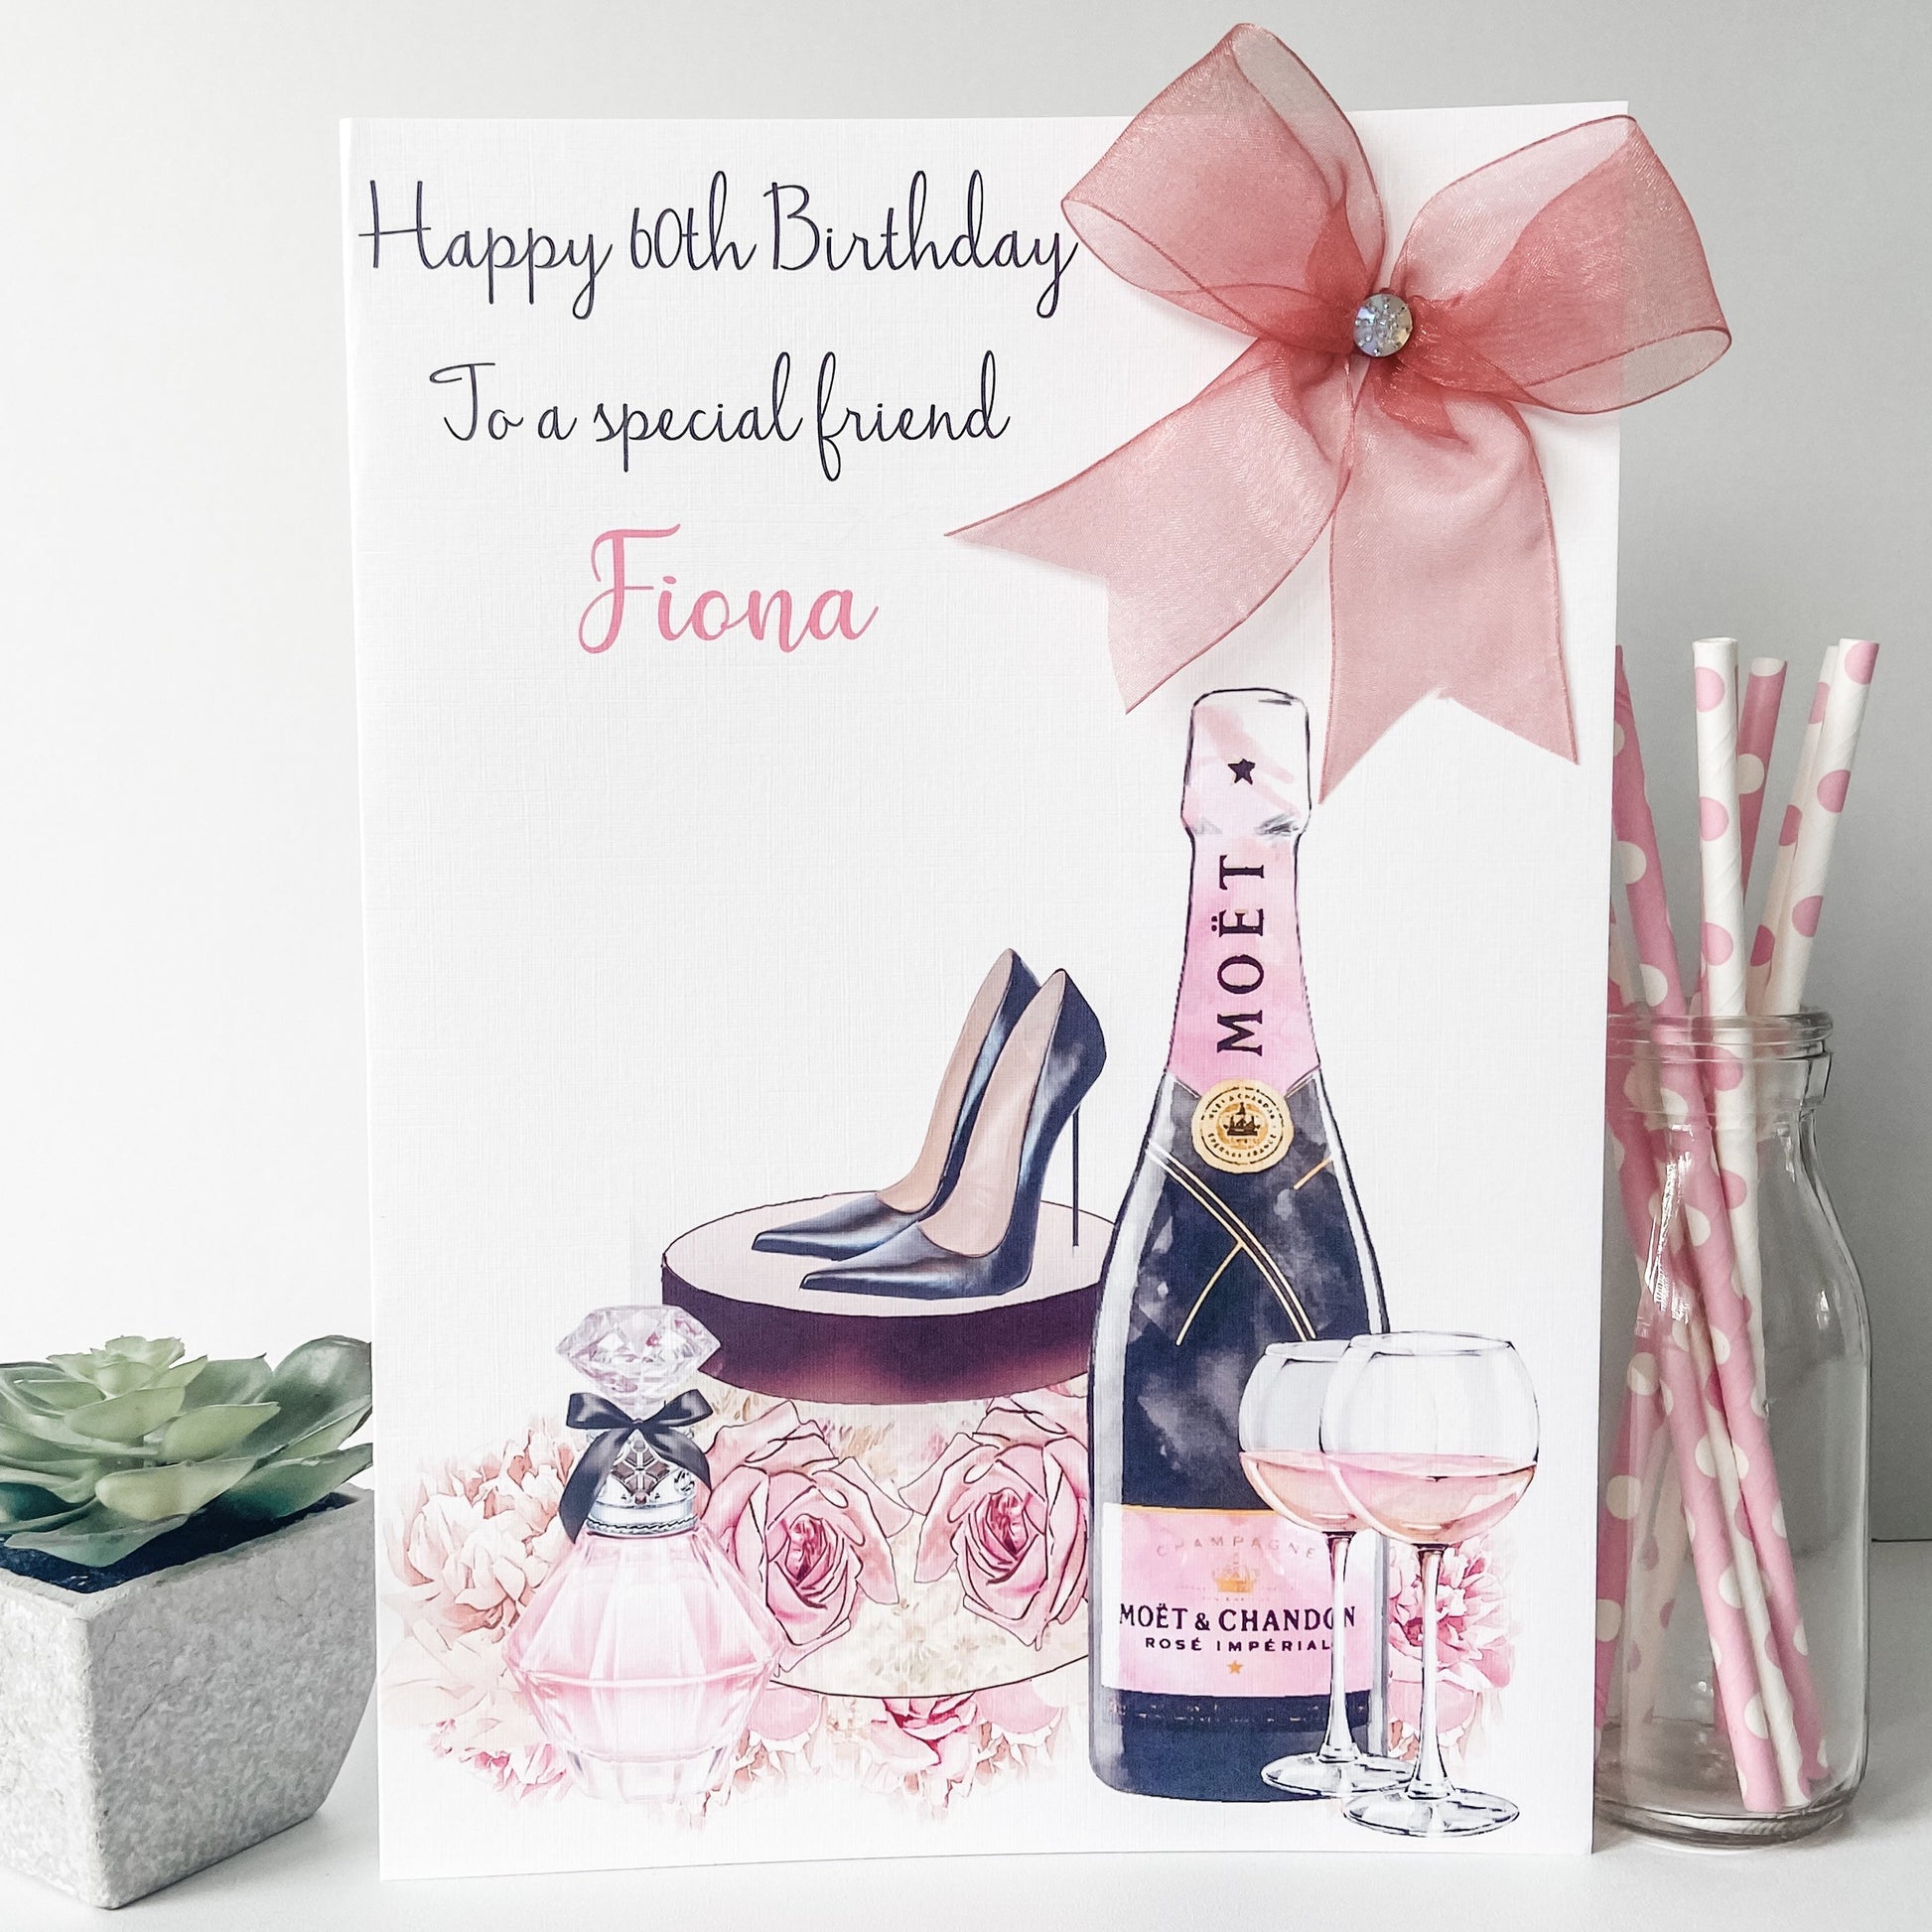 Personalised Handmade Luxury Large A4 Birthday Card Daughter Friend Bestie Auntie Niece 21st 30th 40th 50th 60th 70th